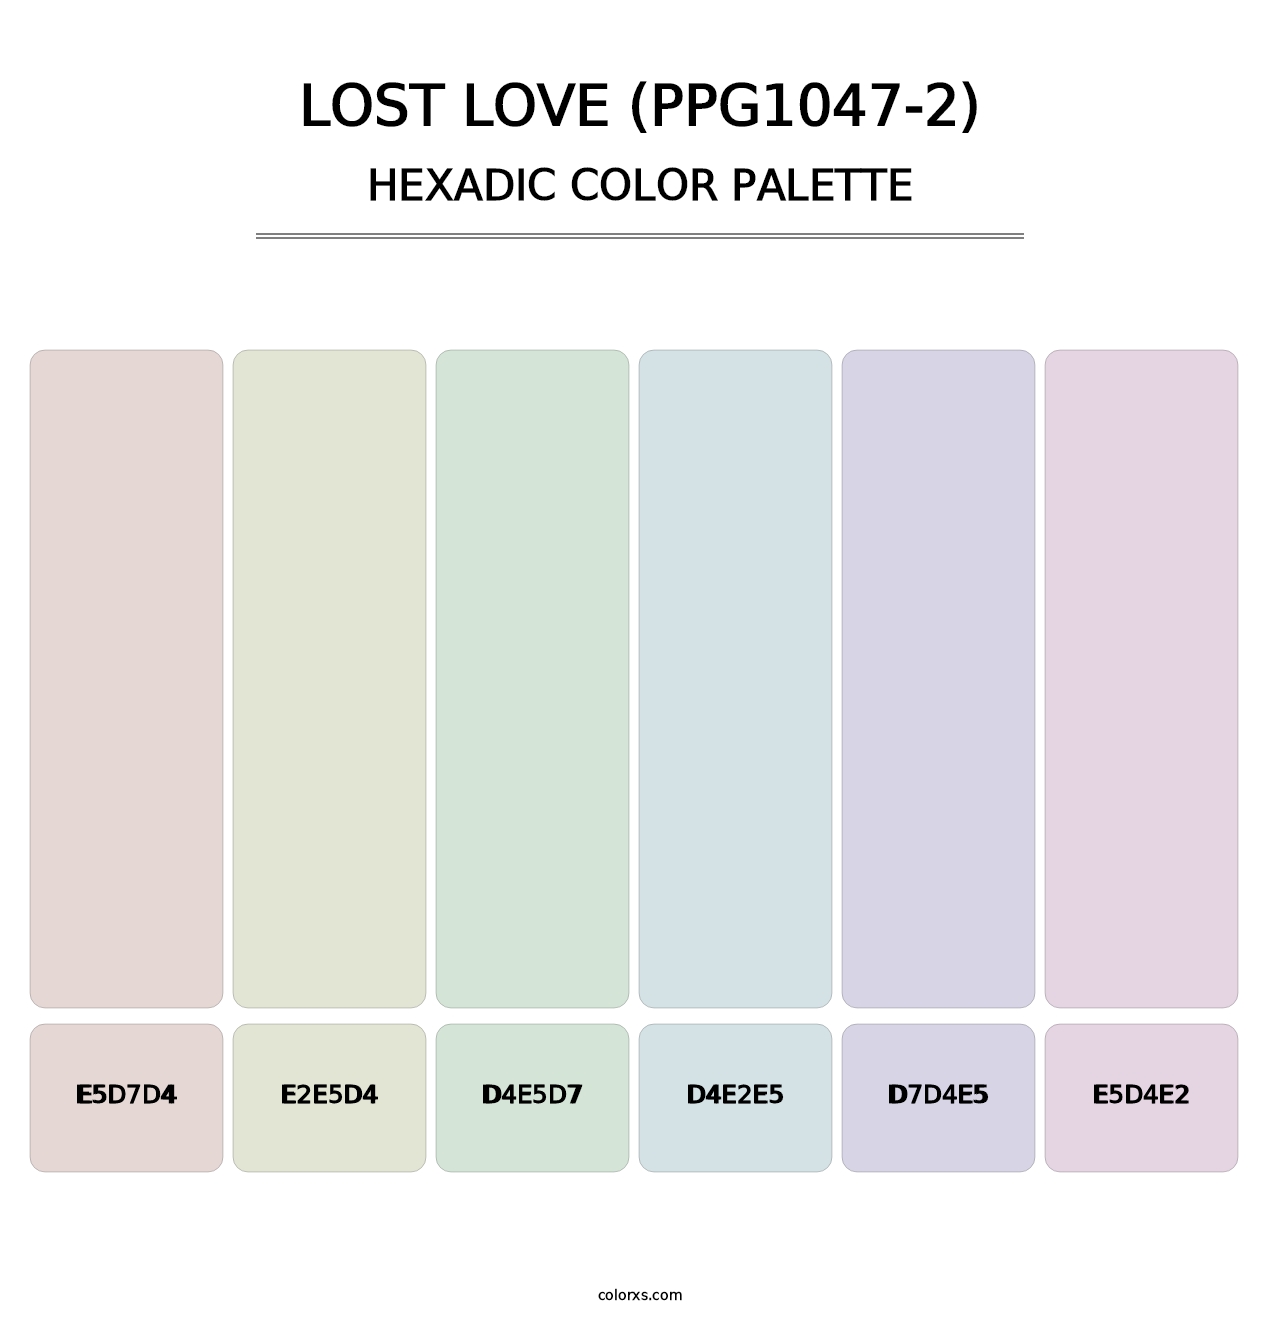 Lost Love (PPG1047-2) - Hexadic Color Palette